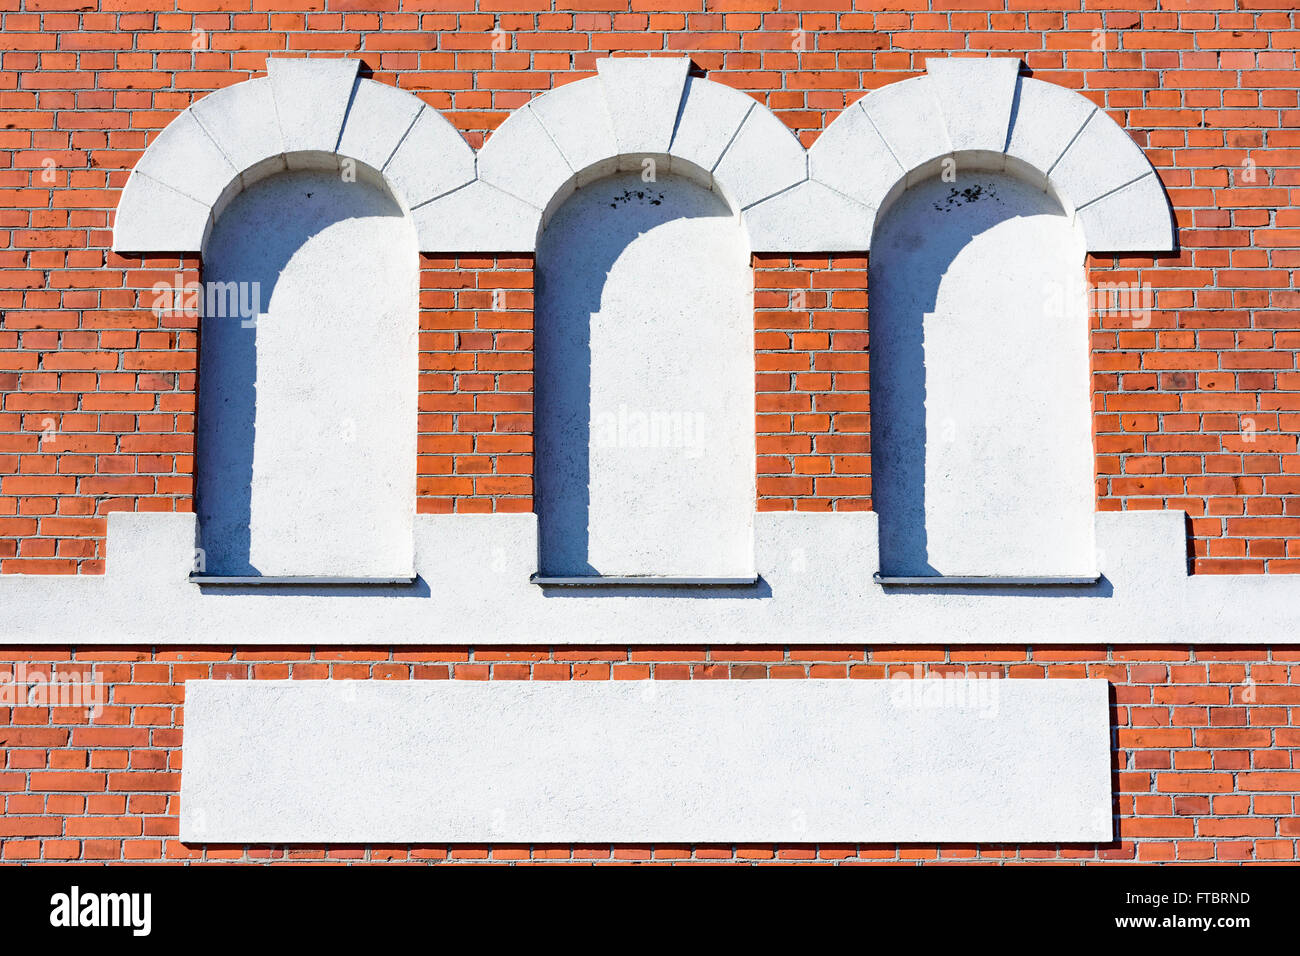 Ahus, Sweden - March 20, 2016: Architectural detail of the Absolut Company factory, the place where Absolut Vodka is made. Red b Stock Photo